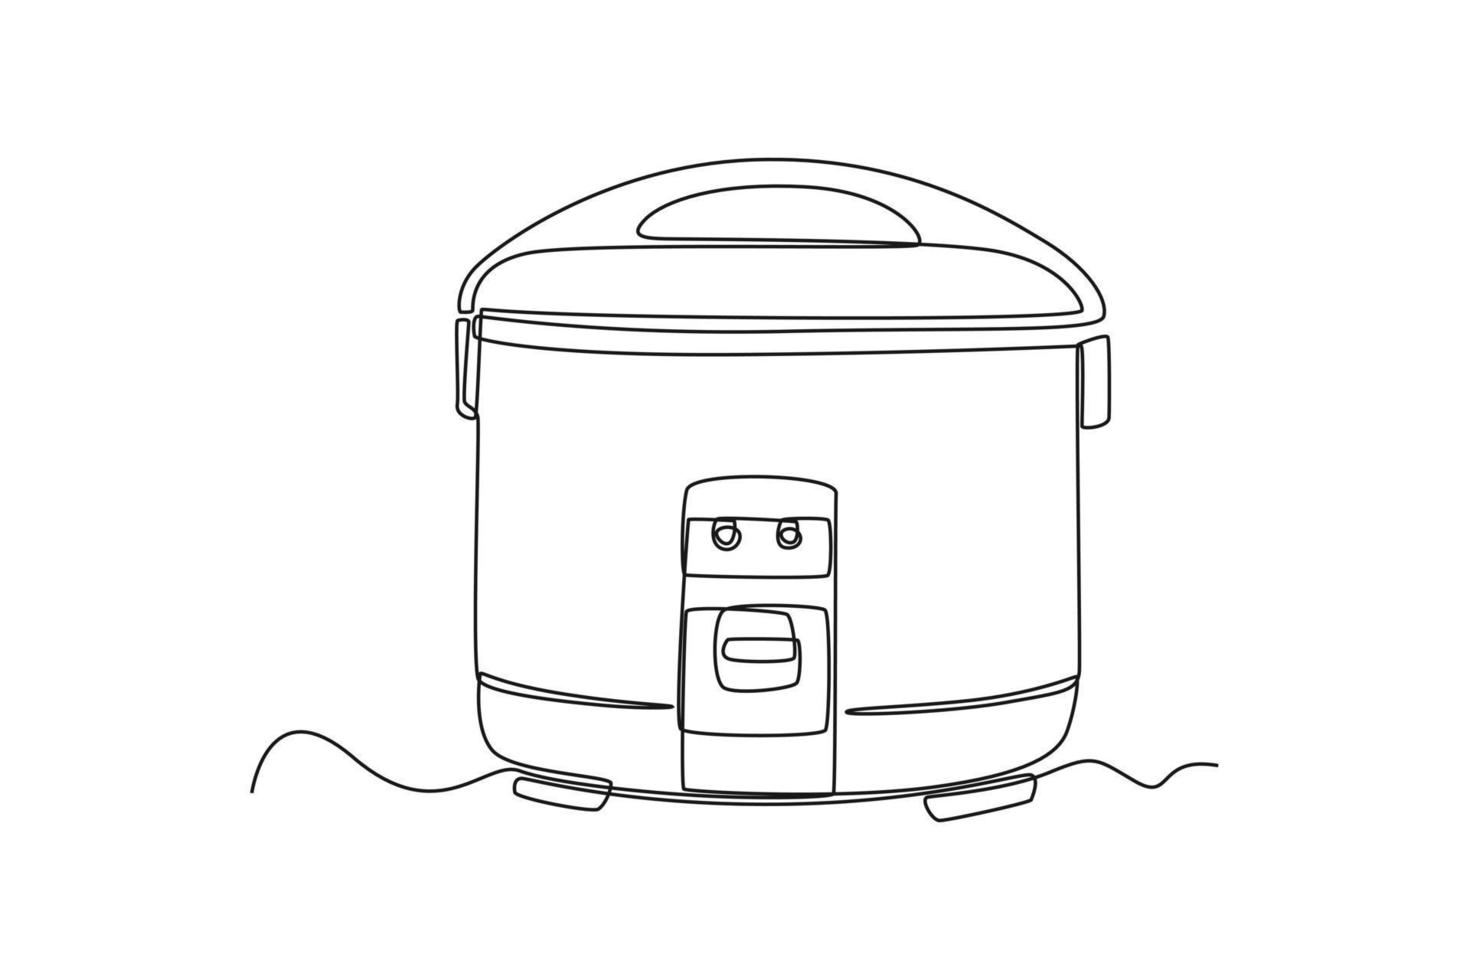 Continuous one line drawing rice cooker. Home appliances concept. Single line draw design vector graphic illustration.